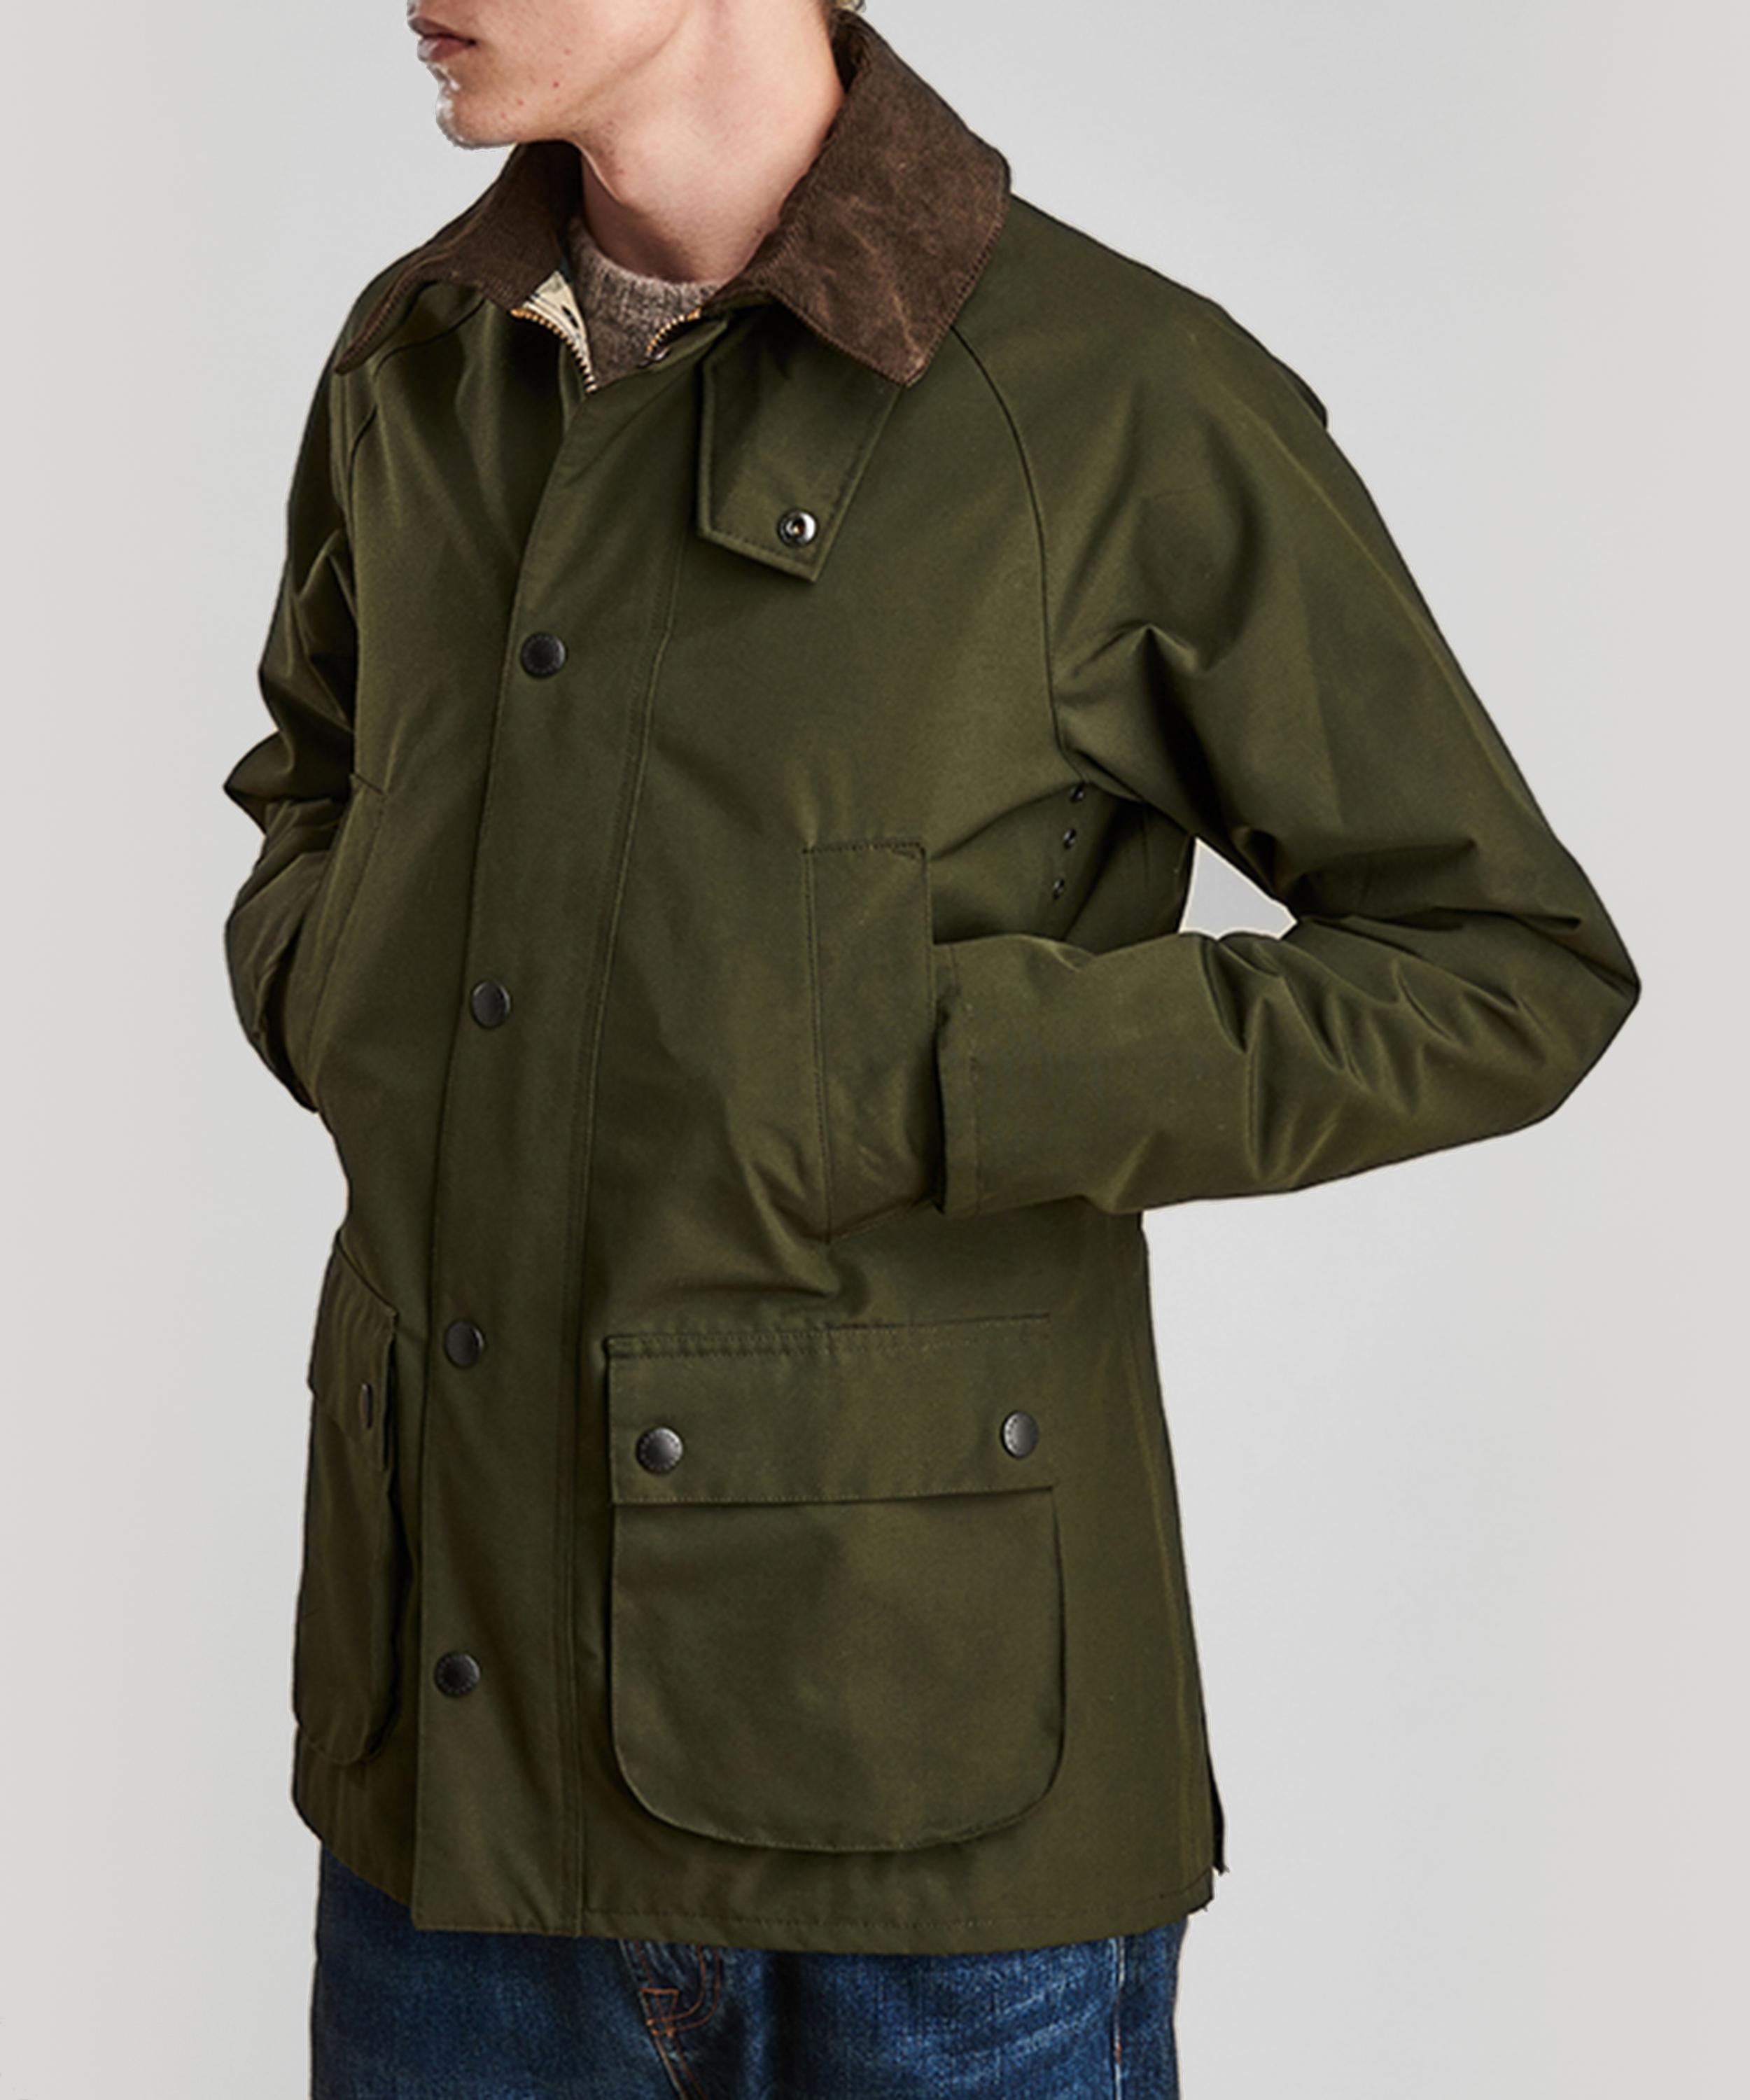 Barbour Bedale Wax Jacket in Green for Men - Lyst